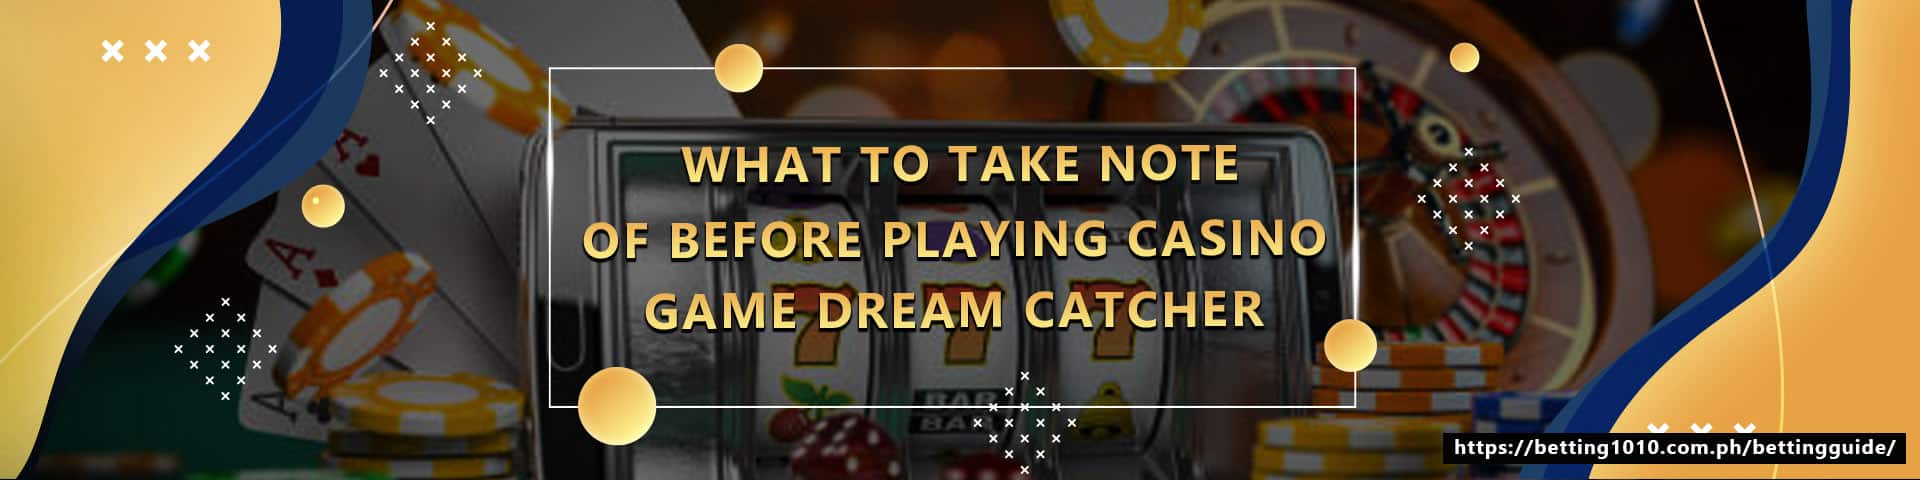 What To Take Note Of Before Playing Casino Game Dream Catcher